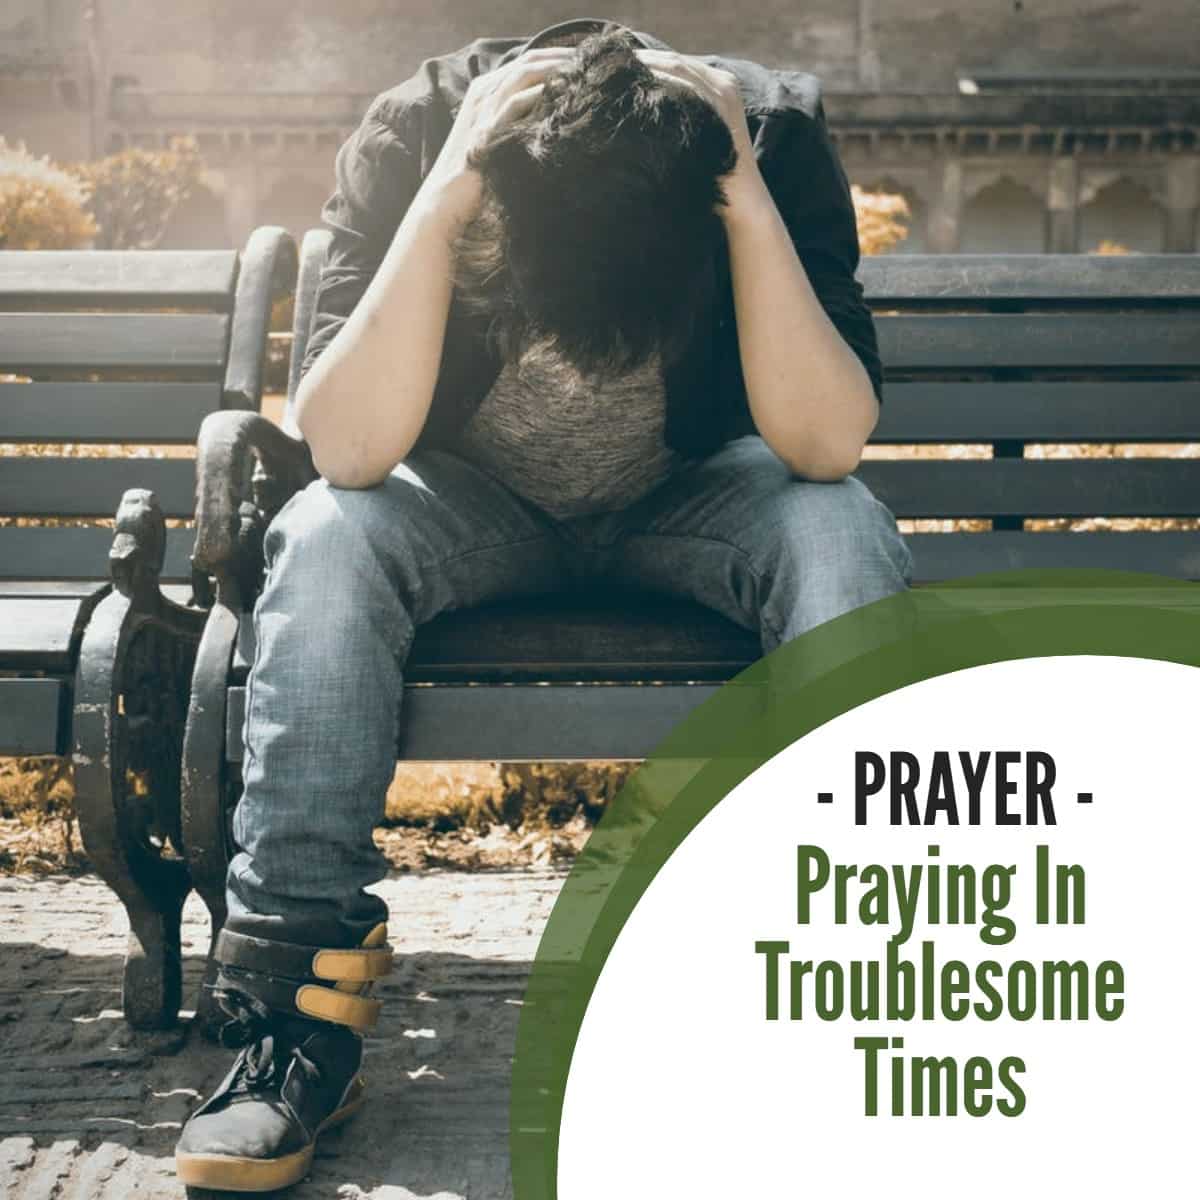 Praying In Troublesome Times